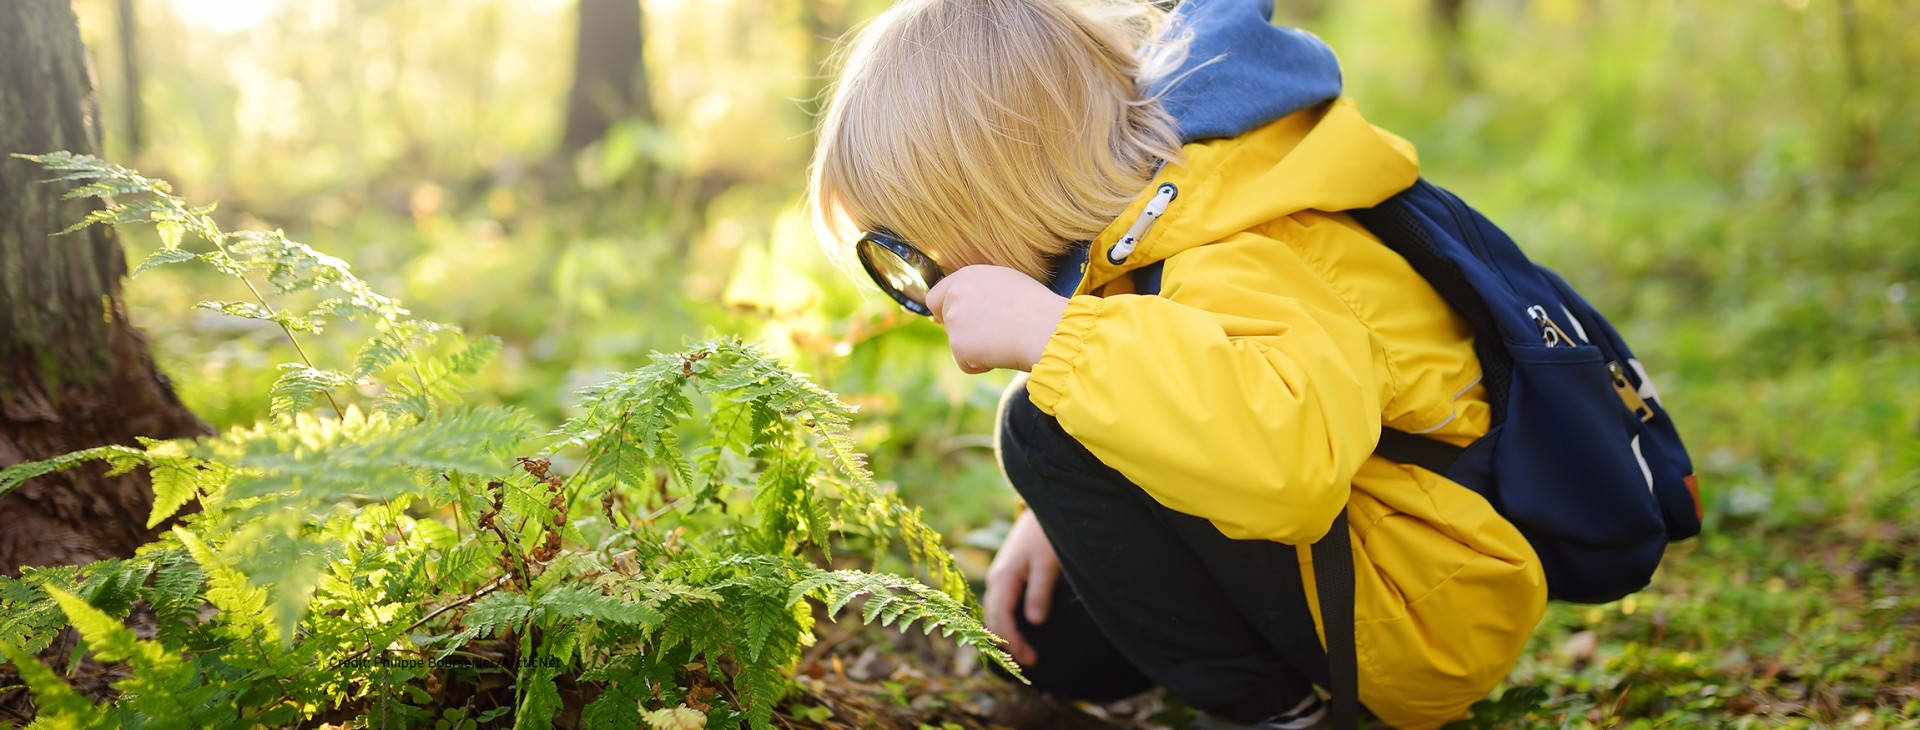 Preschooler boy explores nature with magnifying glass. Toddler looks at fern leaf with magnifying glass.